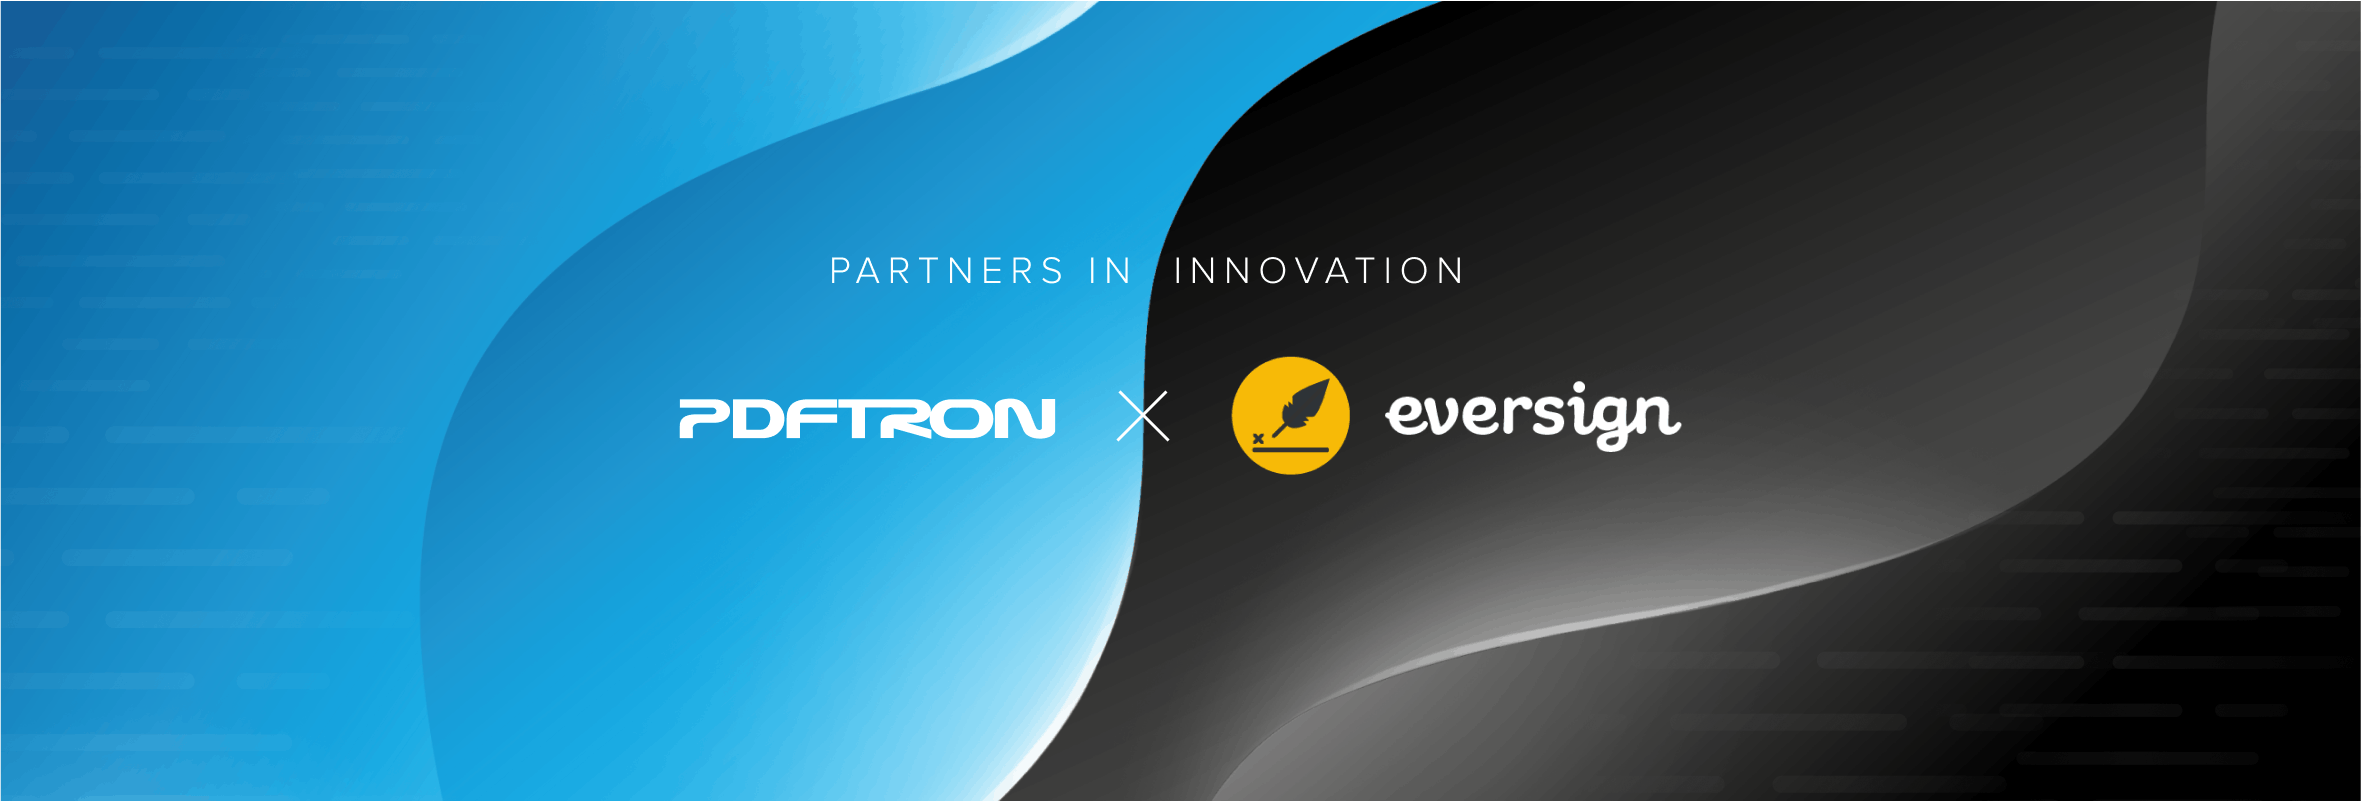 pdftron acquires eversign blog banner